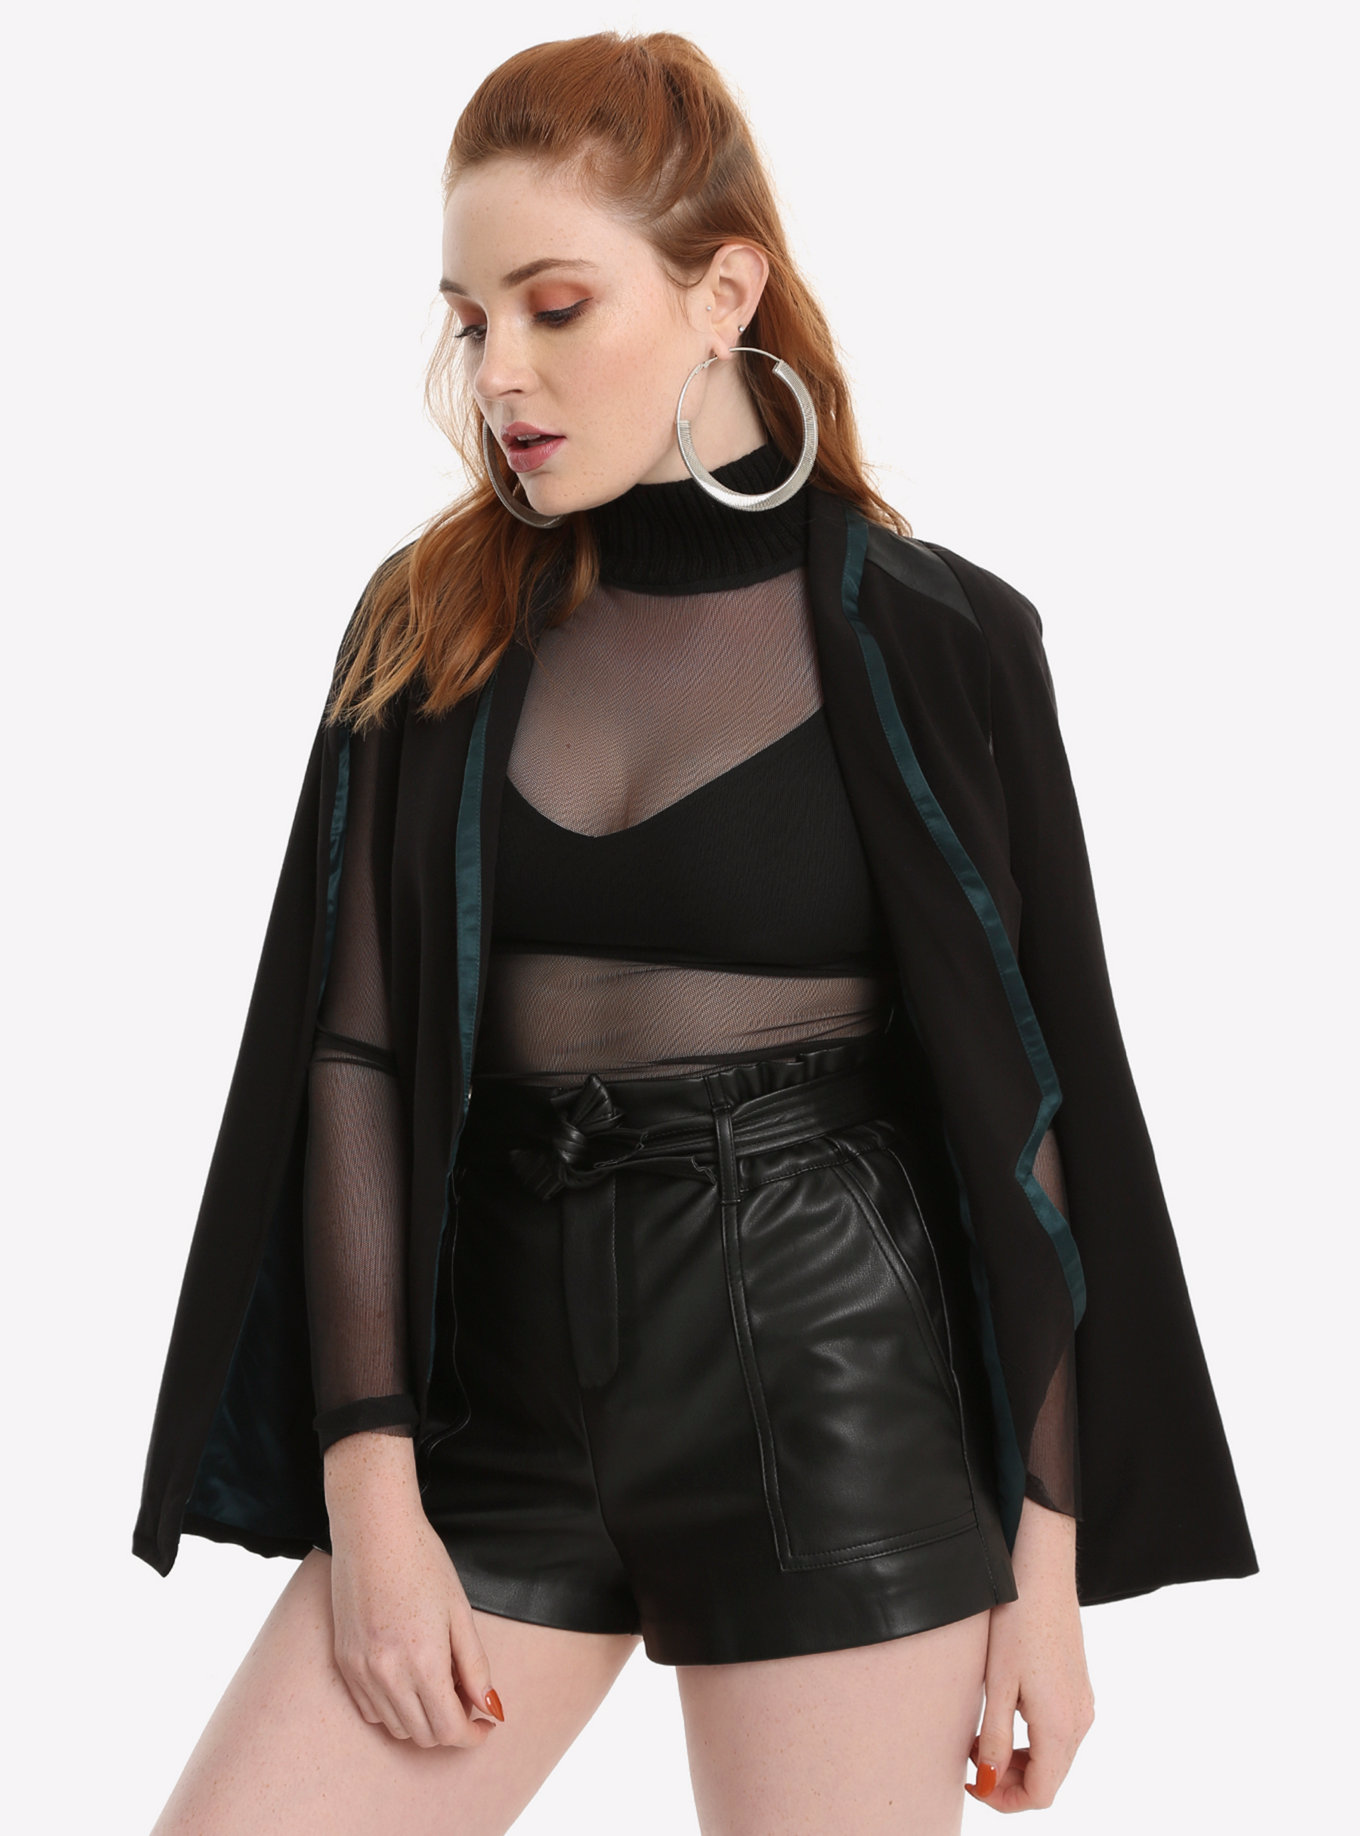 This Loki Clothing Line For Ladies Is Incredible